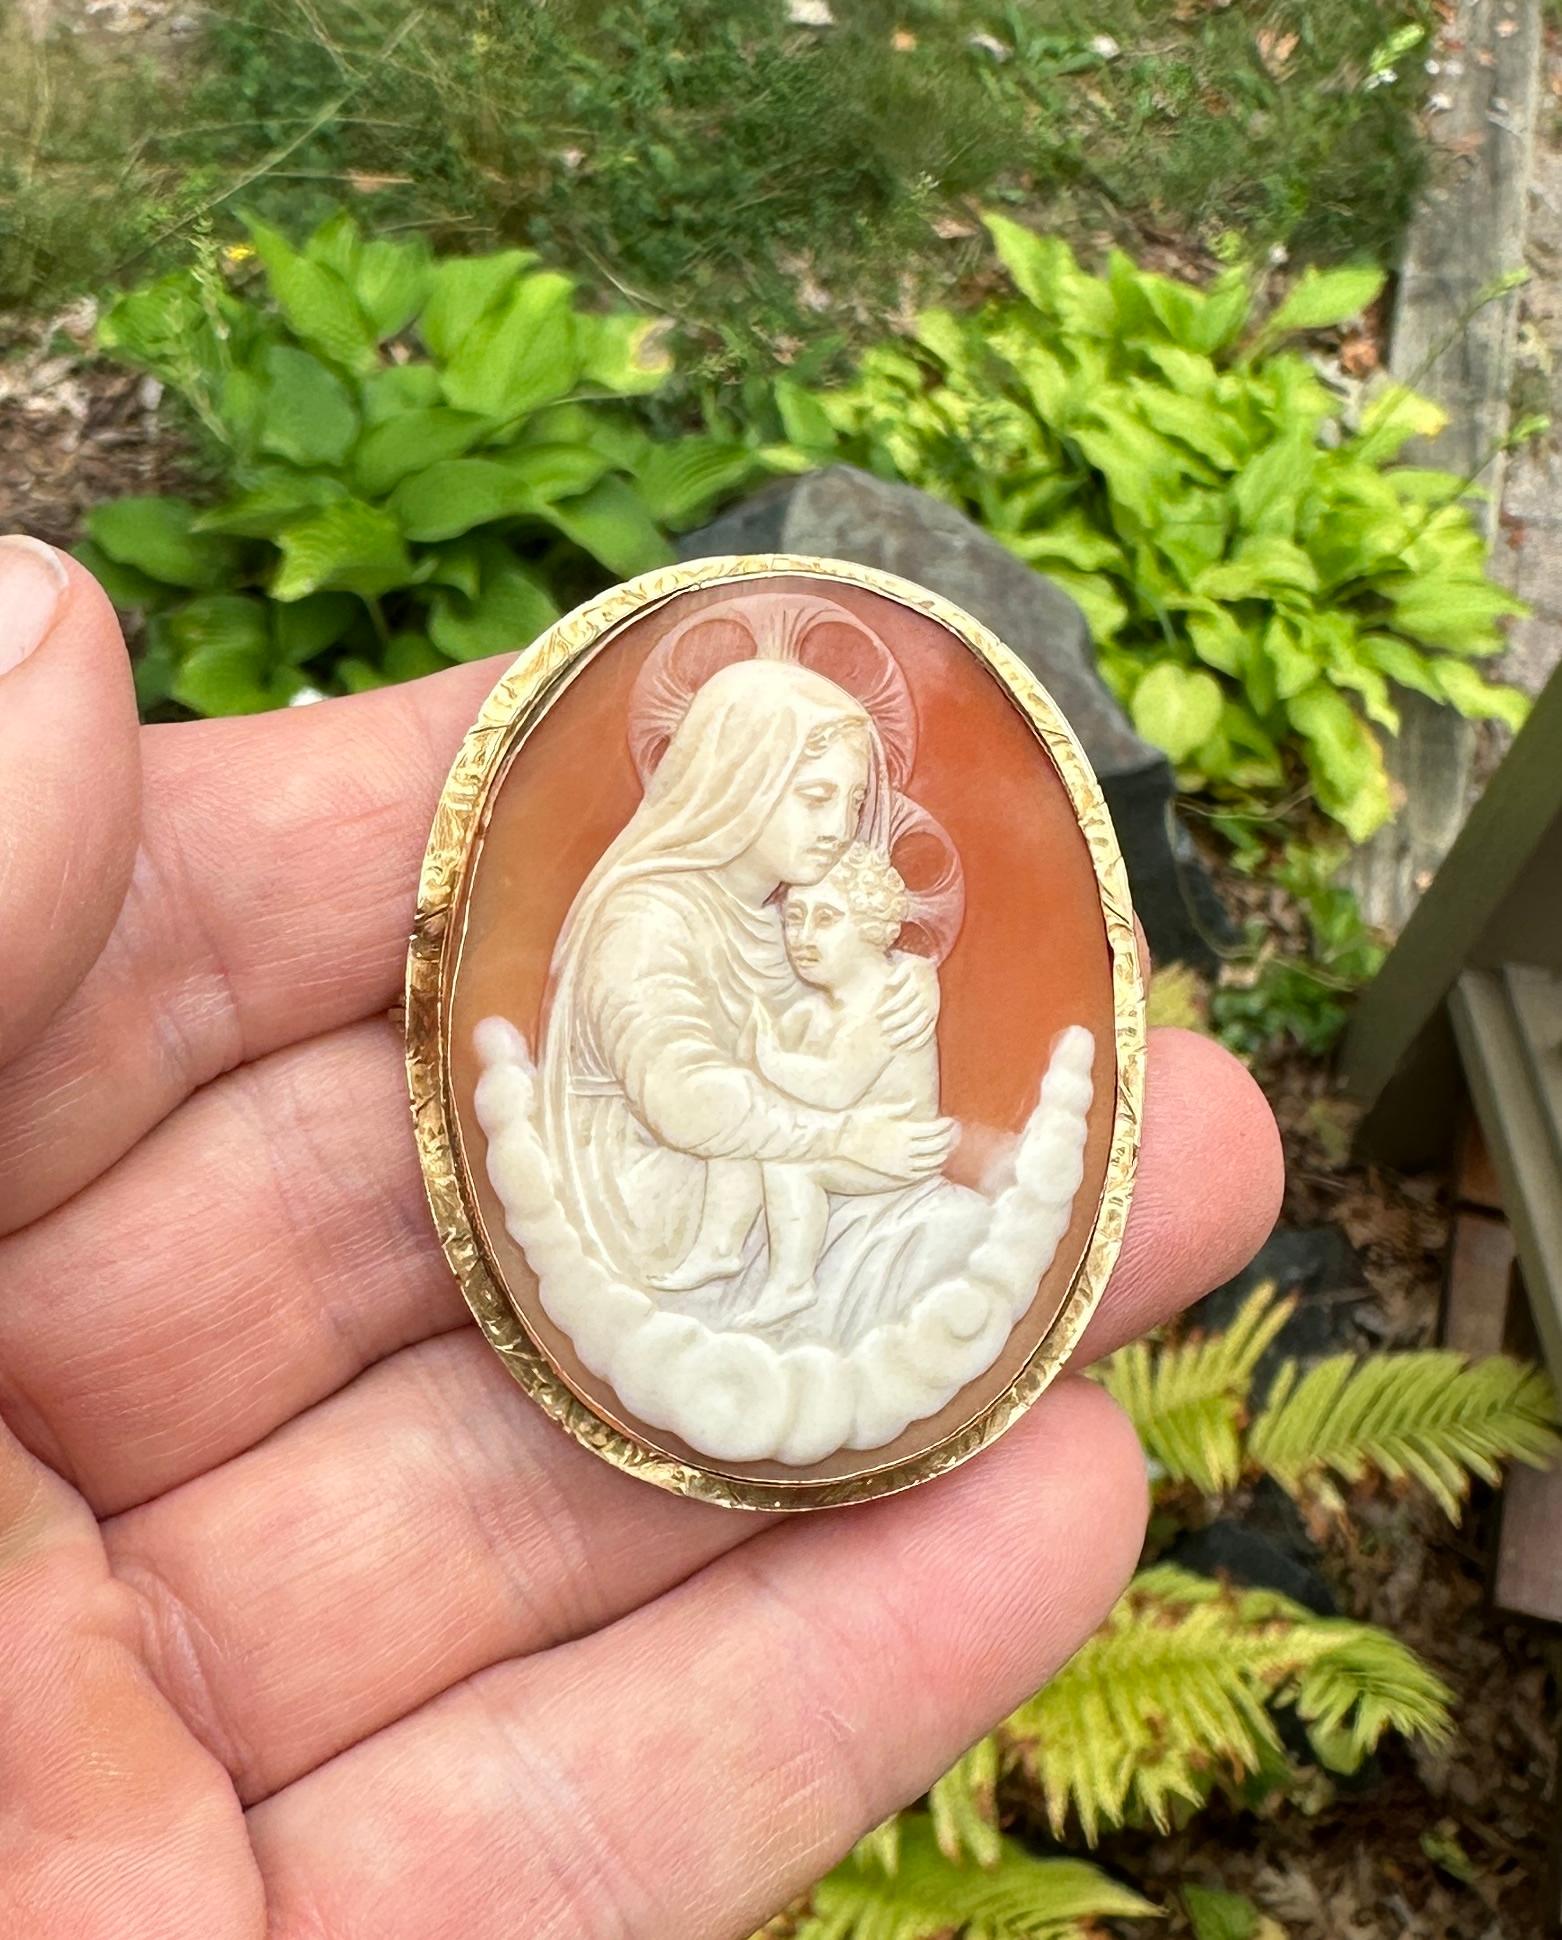 Madonna and Child Cameo Pendant Brooch Pin 14 Karat Gold Antique Victorian Rare In Excellent Condition For Sale In New York, NY